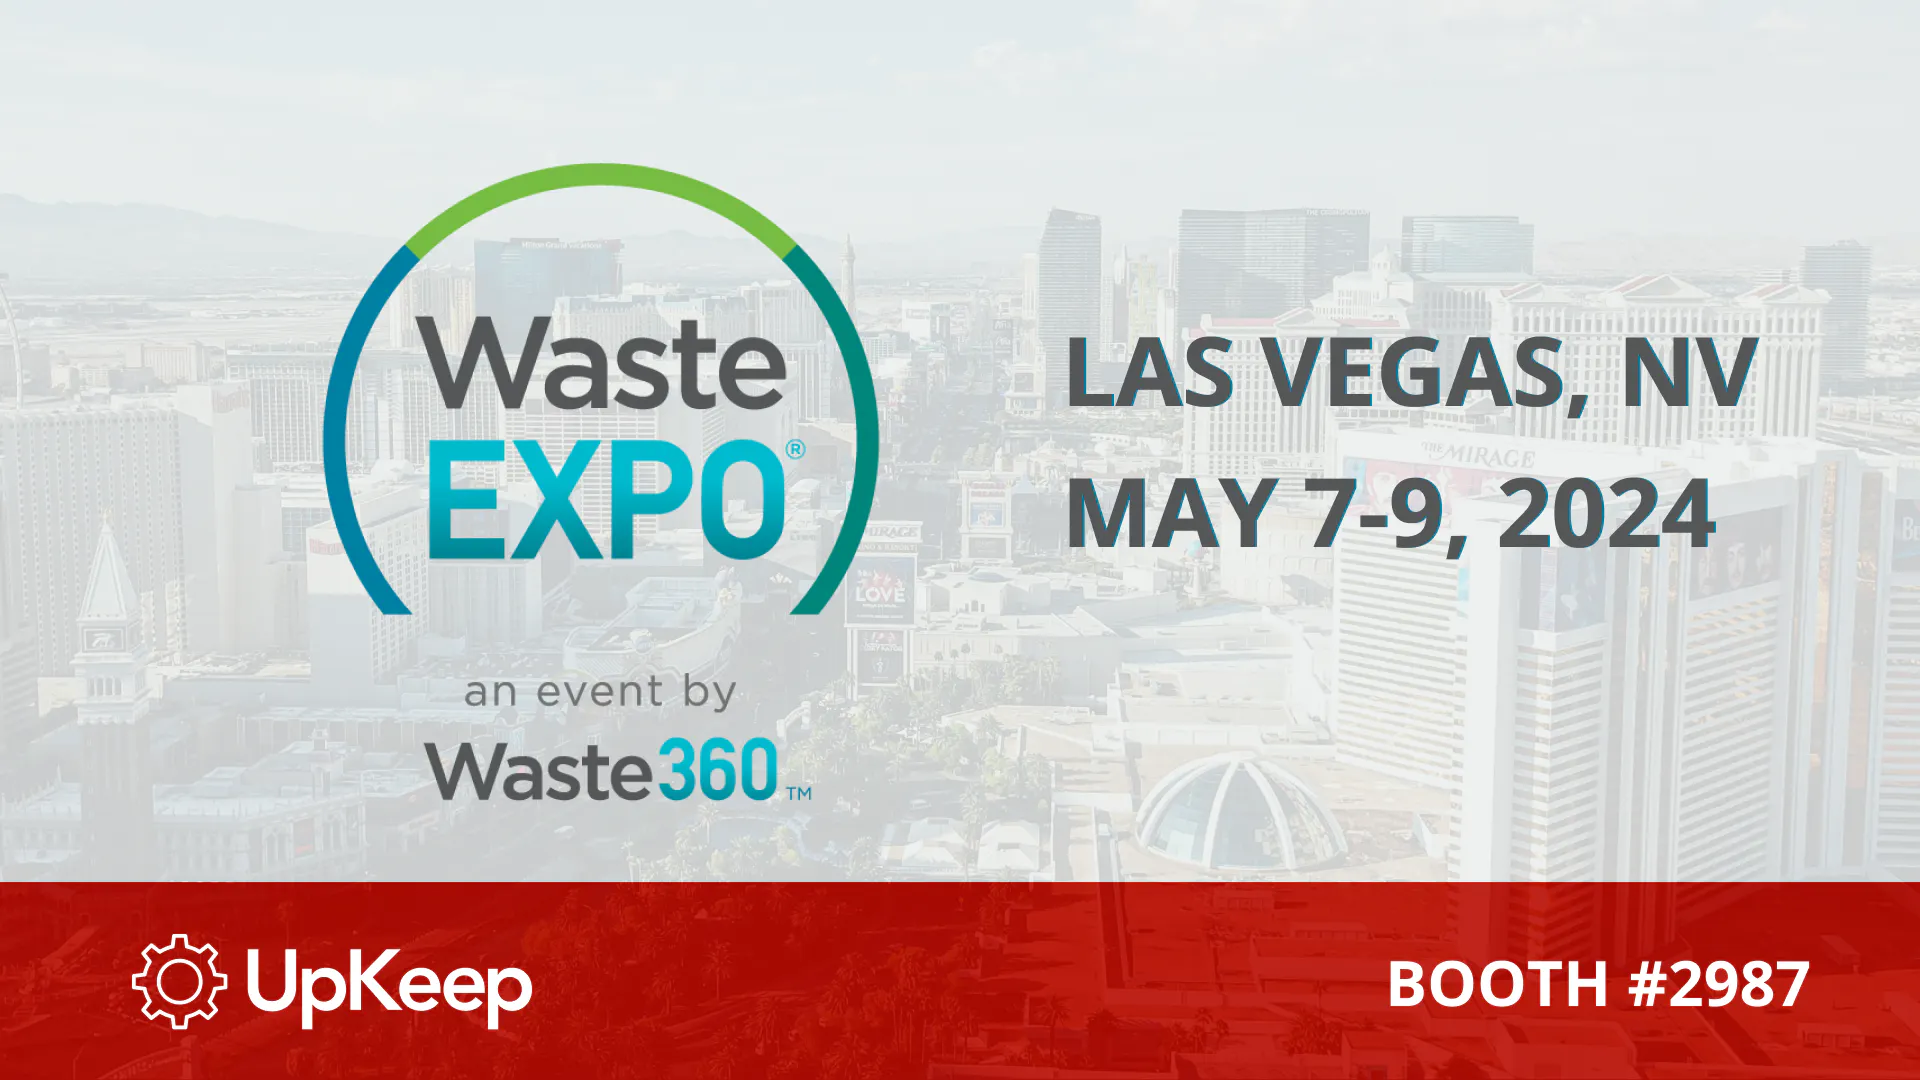 UpKeep at Waste Expo 2024: Get Ready for Booth 2987!